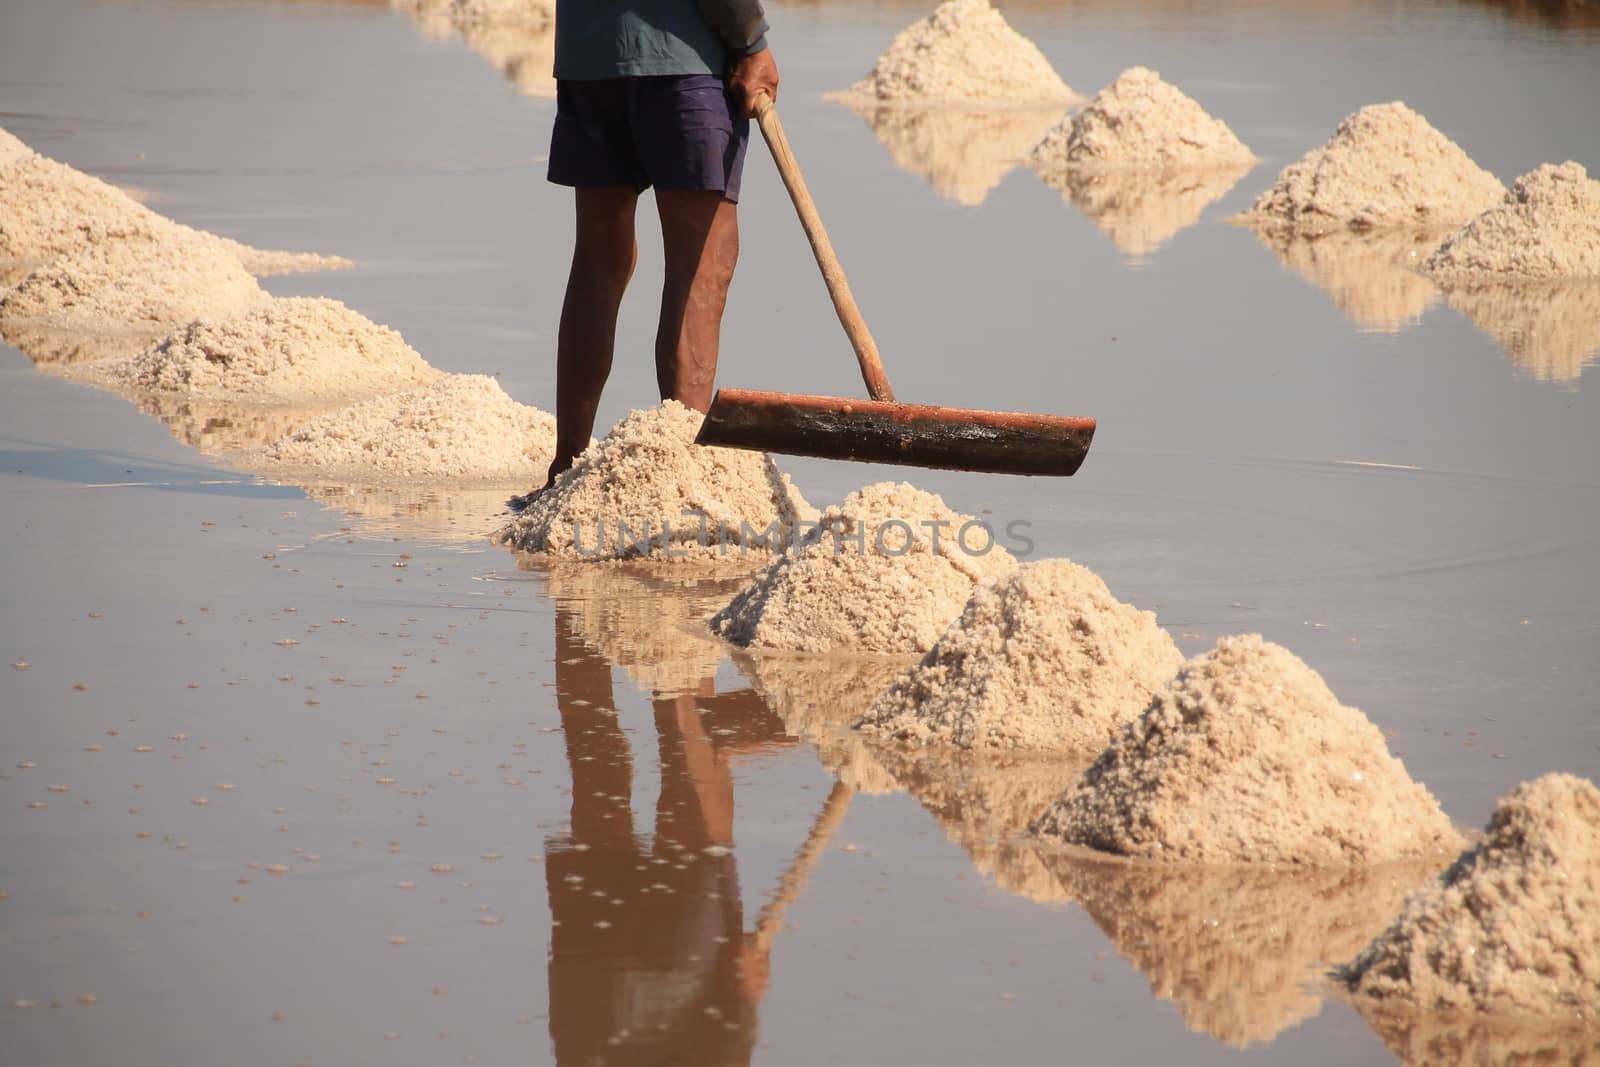 A salt farm worker harvesting salt which is the traditional and local livelihood of the Khmer people in Kampot Province, Cambodia